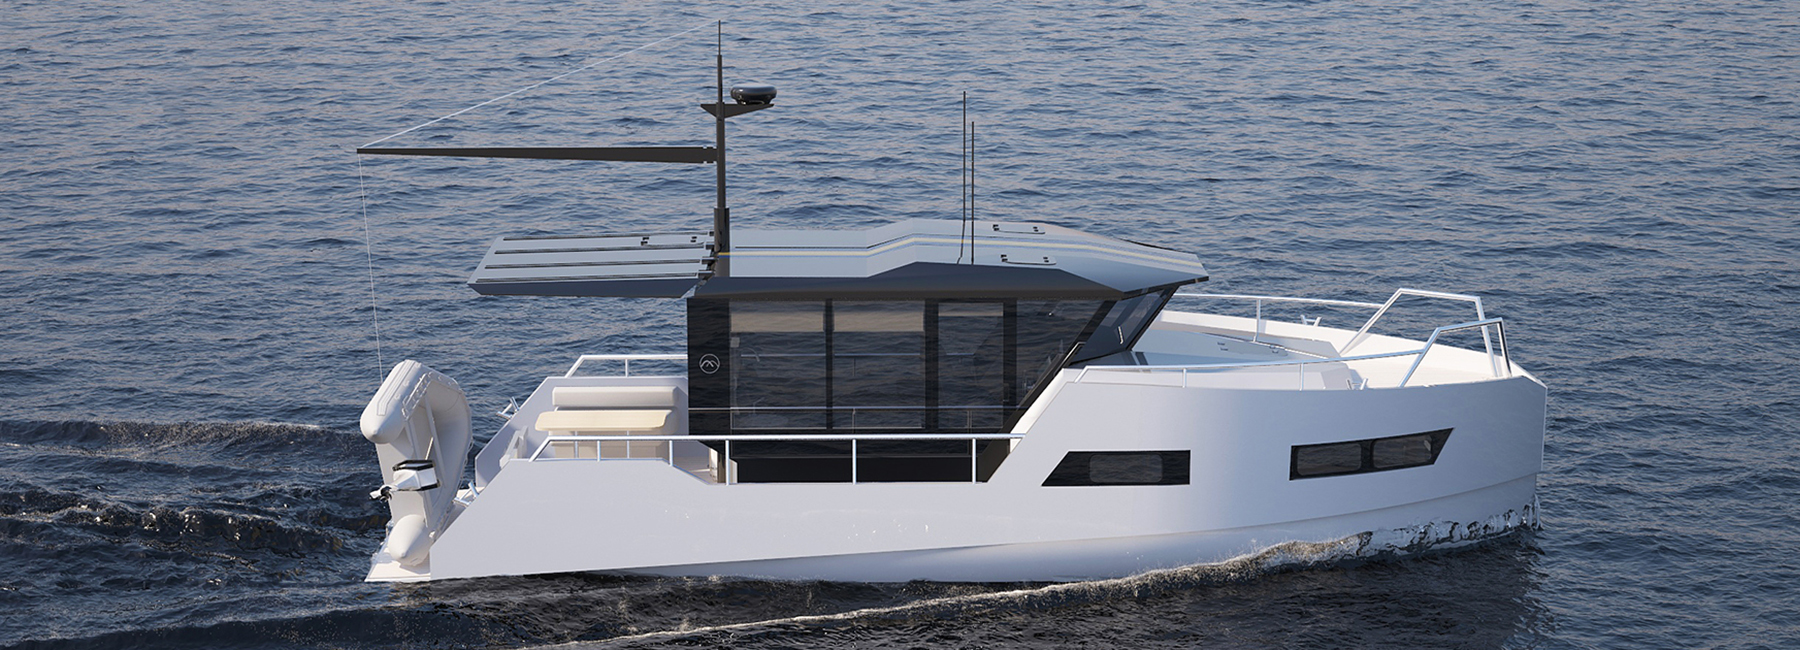 vik unveils electric boat that can be recharged from solar panels or